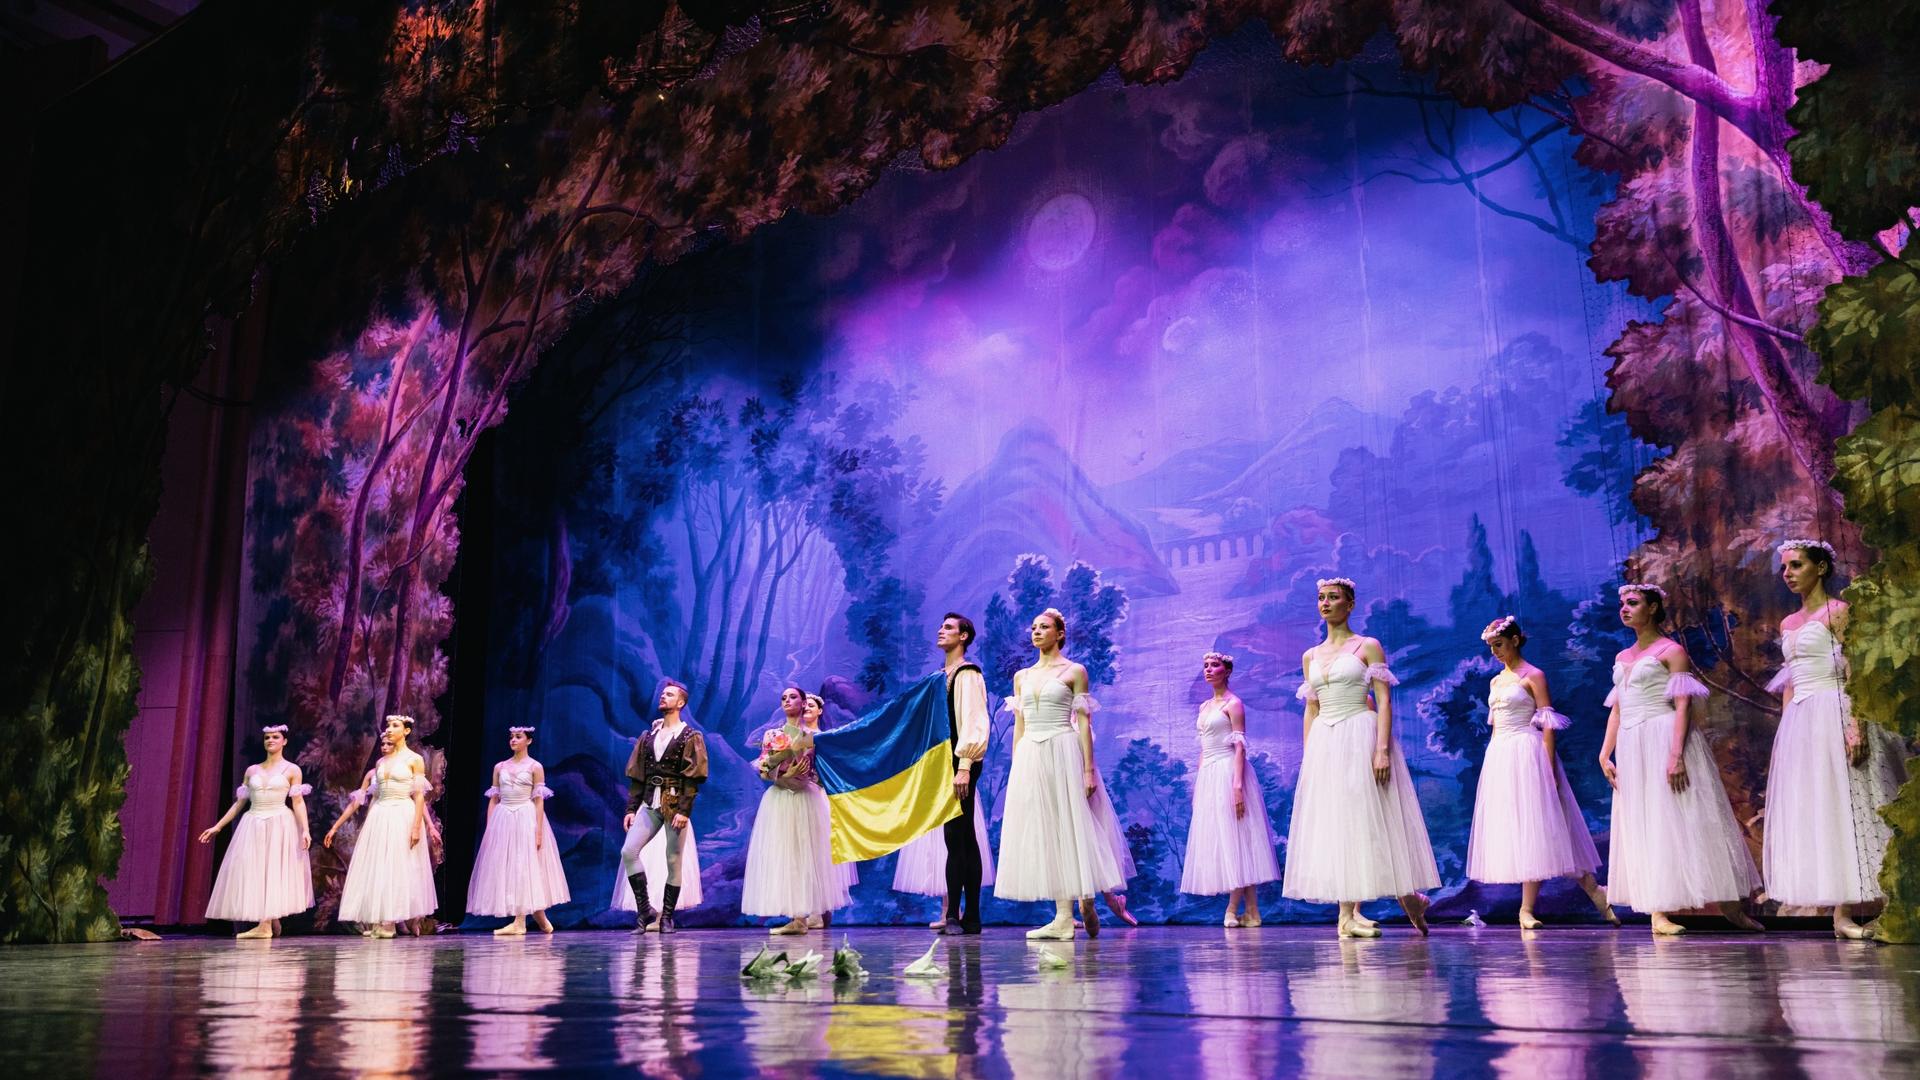 The Ukrainian Classical Ballet company holds up the Ukrainian flag onstage during curtain call while the Ukrainian national anthem plays as part of a performance in Bucharest, Ukraine.